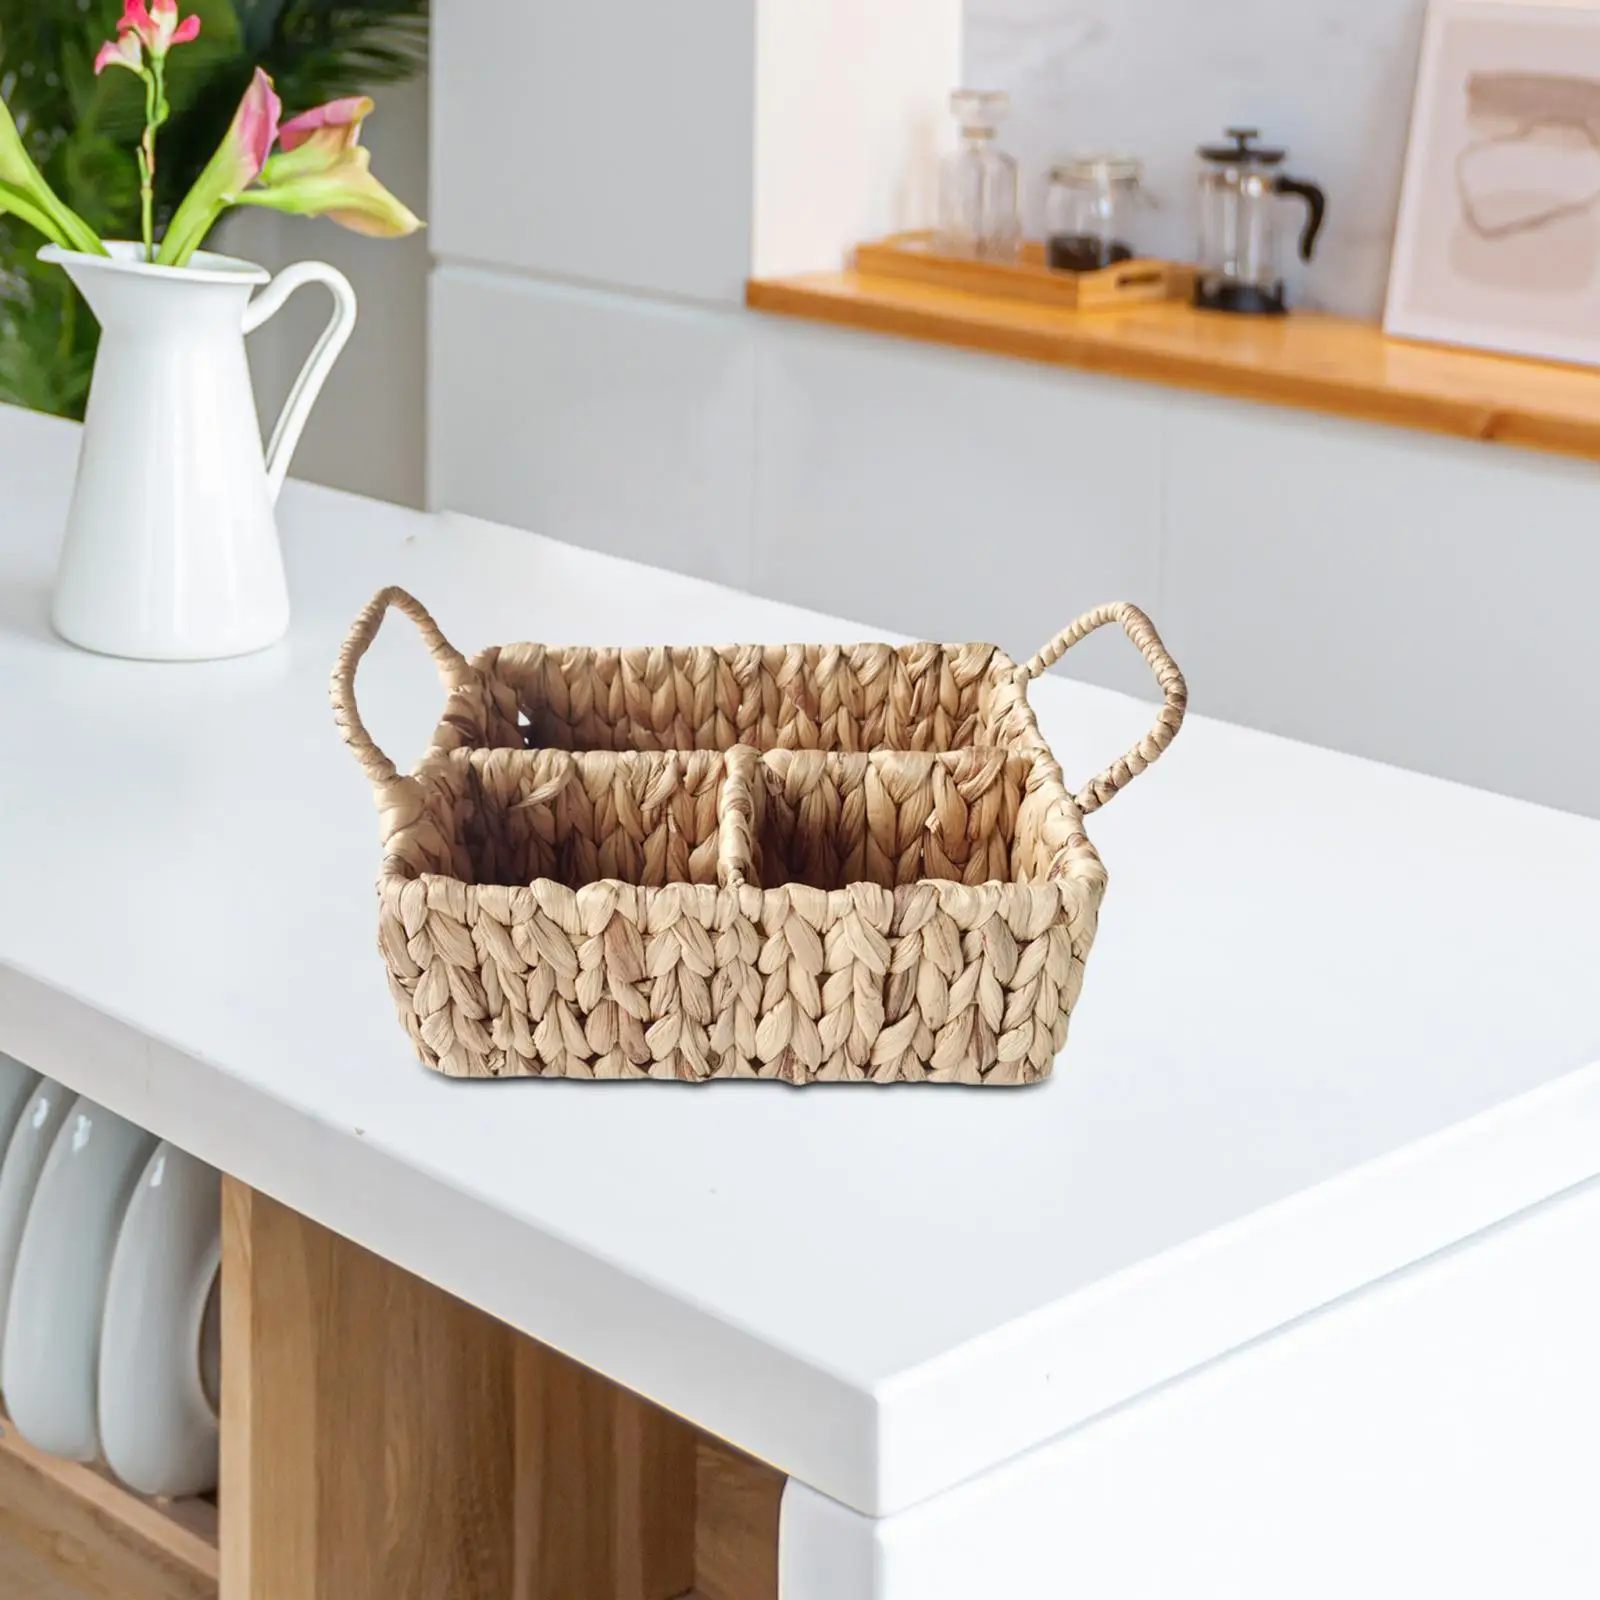 Rattan Woven Divided Storage Basket with Handles Versatile Handmade Snack Container 10x7.8x4inch for Organizing Tabletop Durable